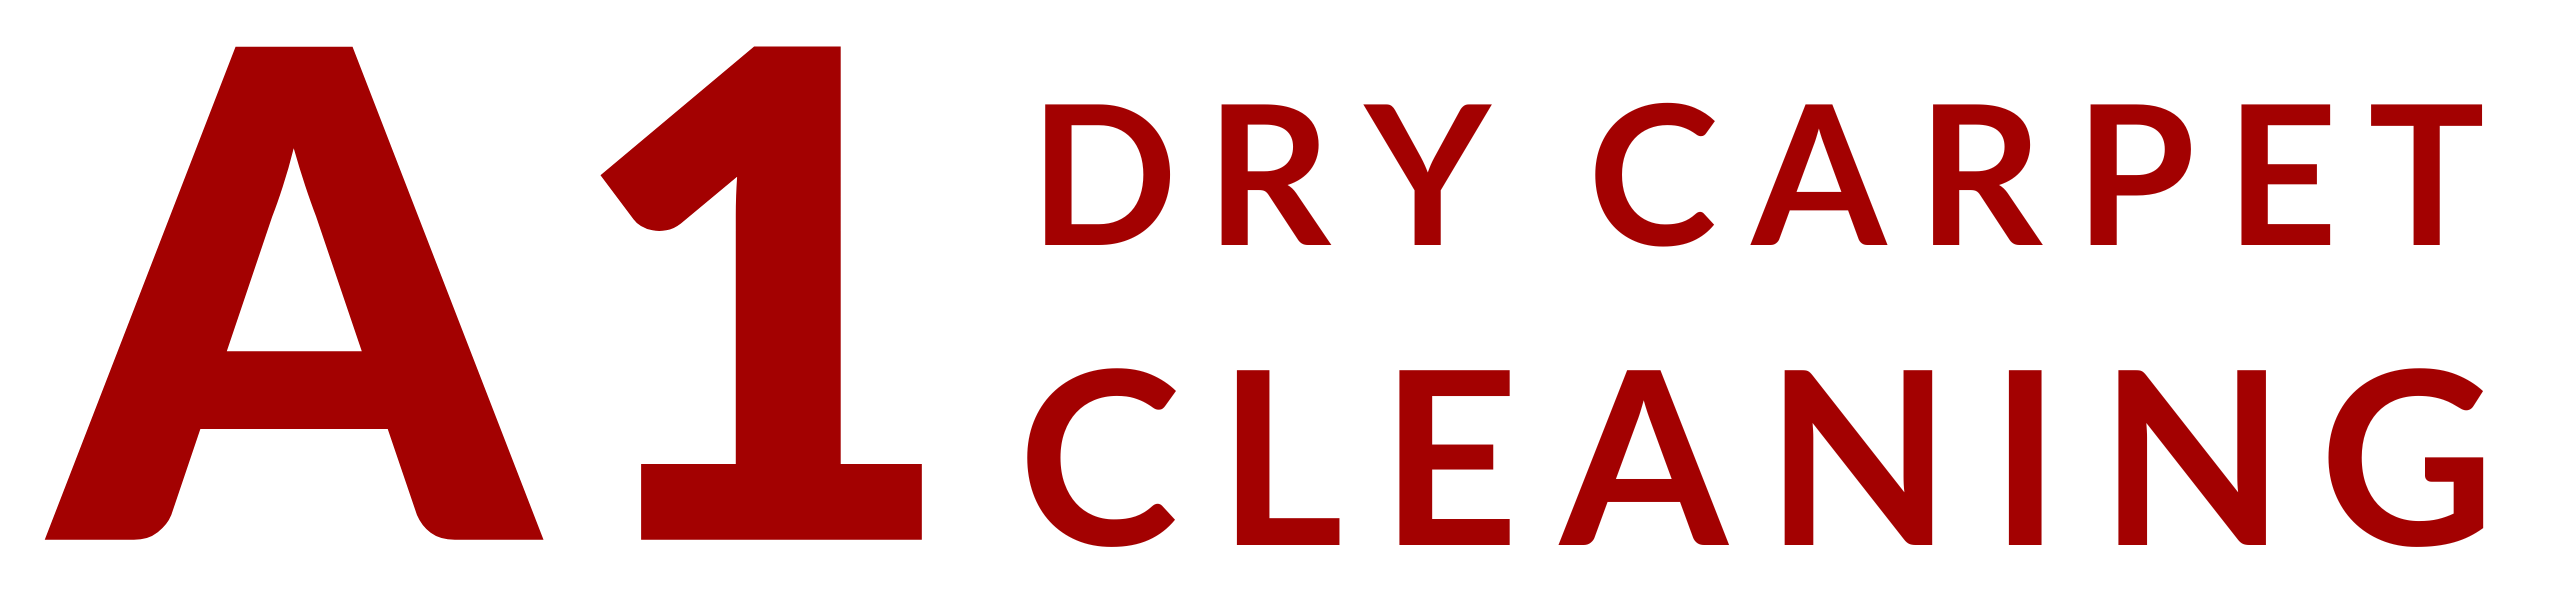 a1 dry carpet cleaning placeholder logo